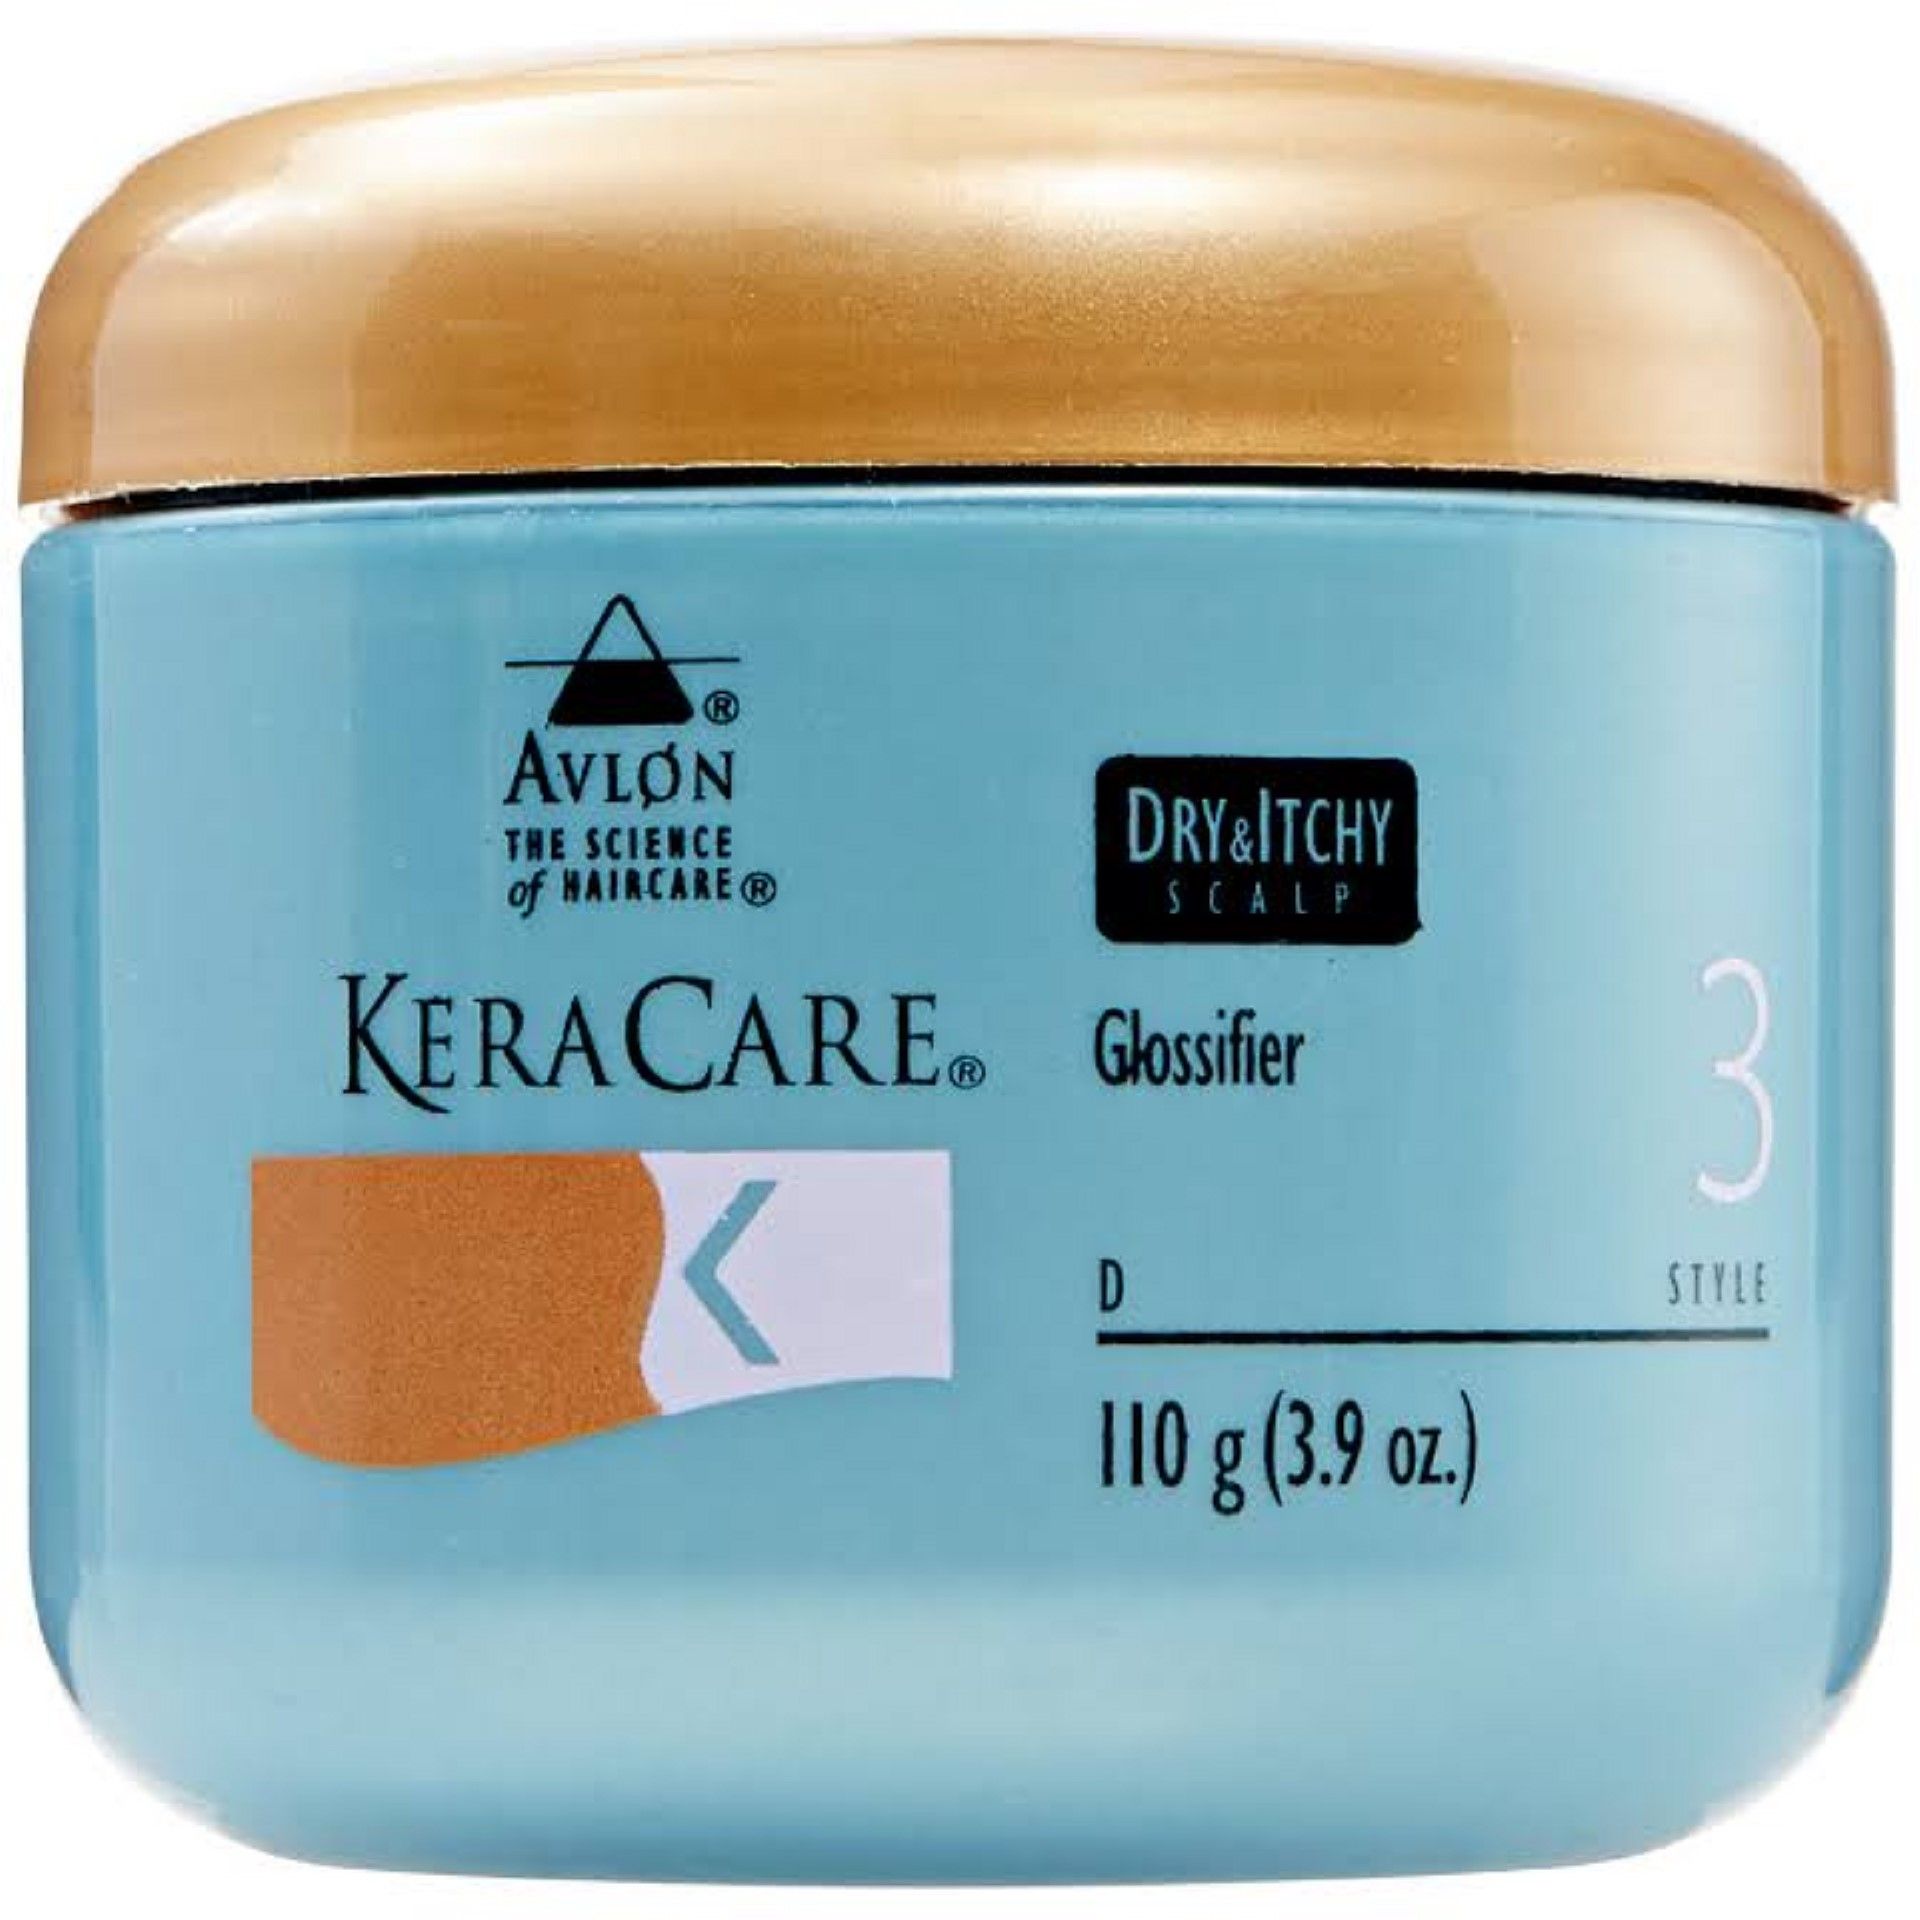 KeraCare Dry and Itchy Scalp Glossifier - 4oz